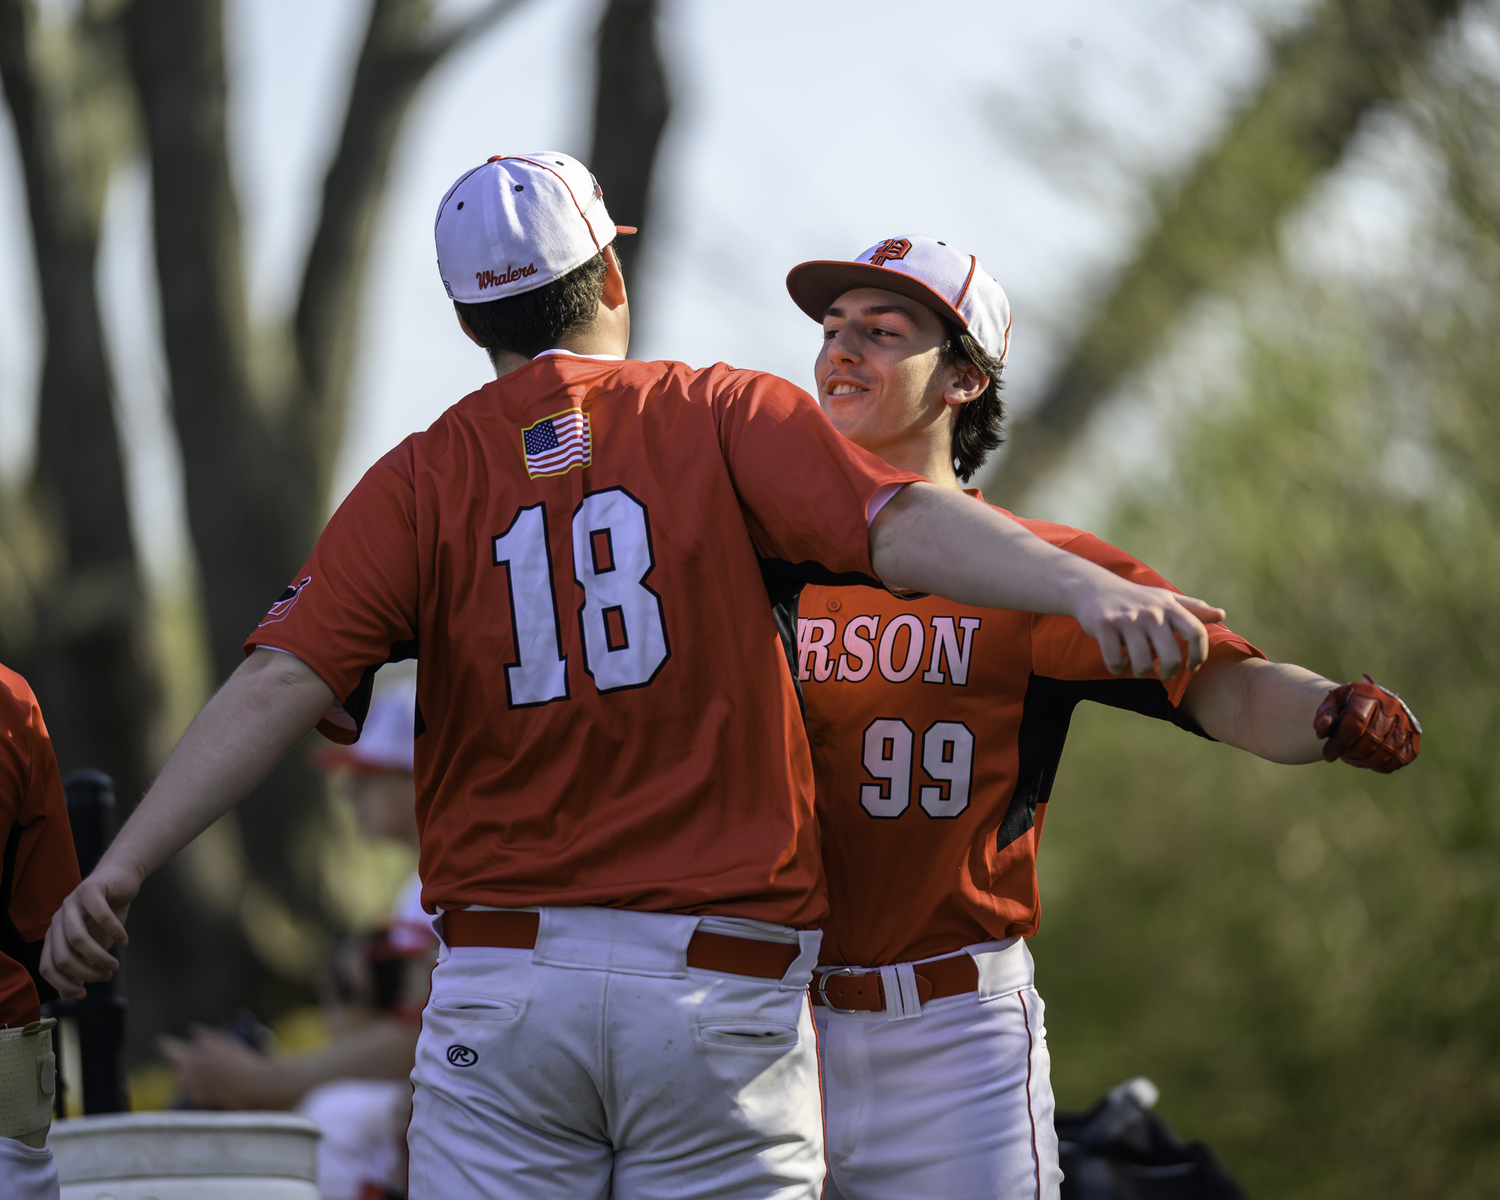 Paul Roesel, left, and Lucas Iulo are happy Whalers during their six-run seventh inning.  MARIANNE BARNETT